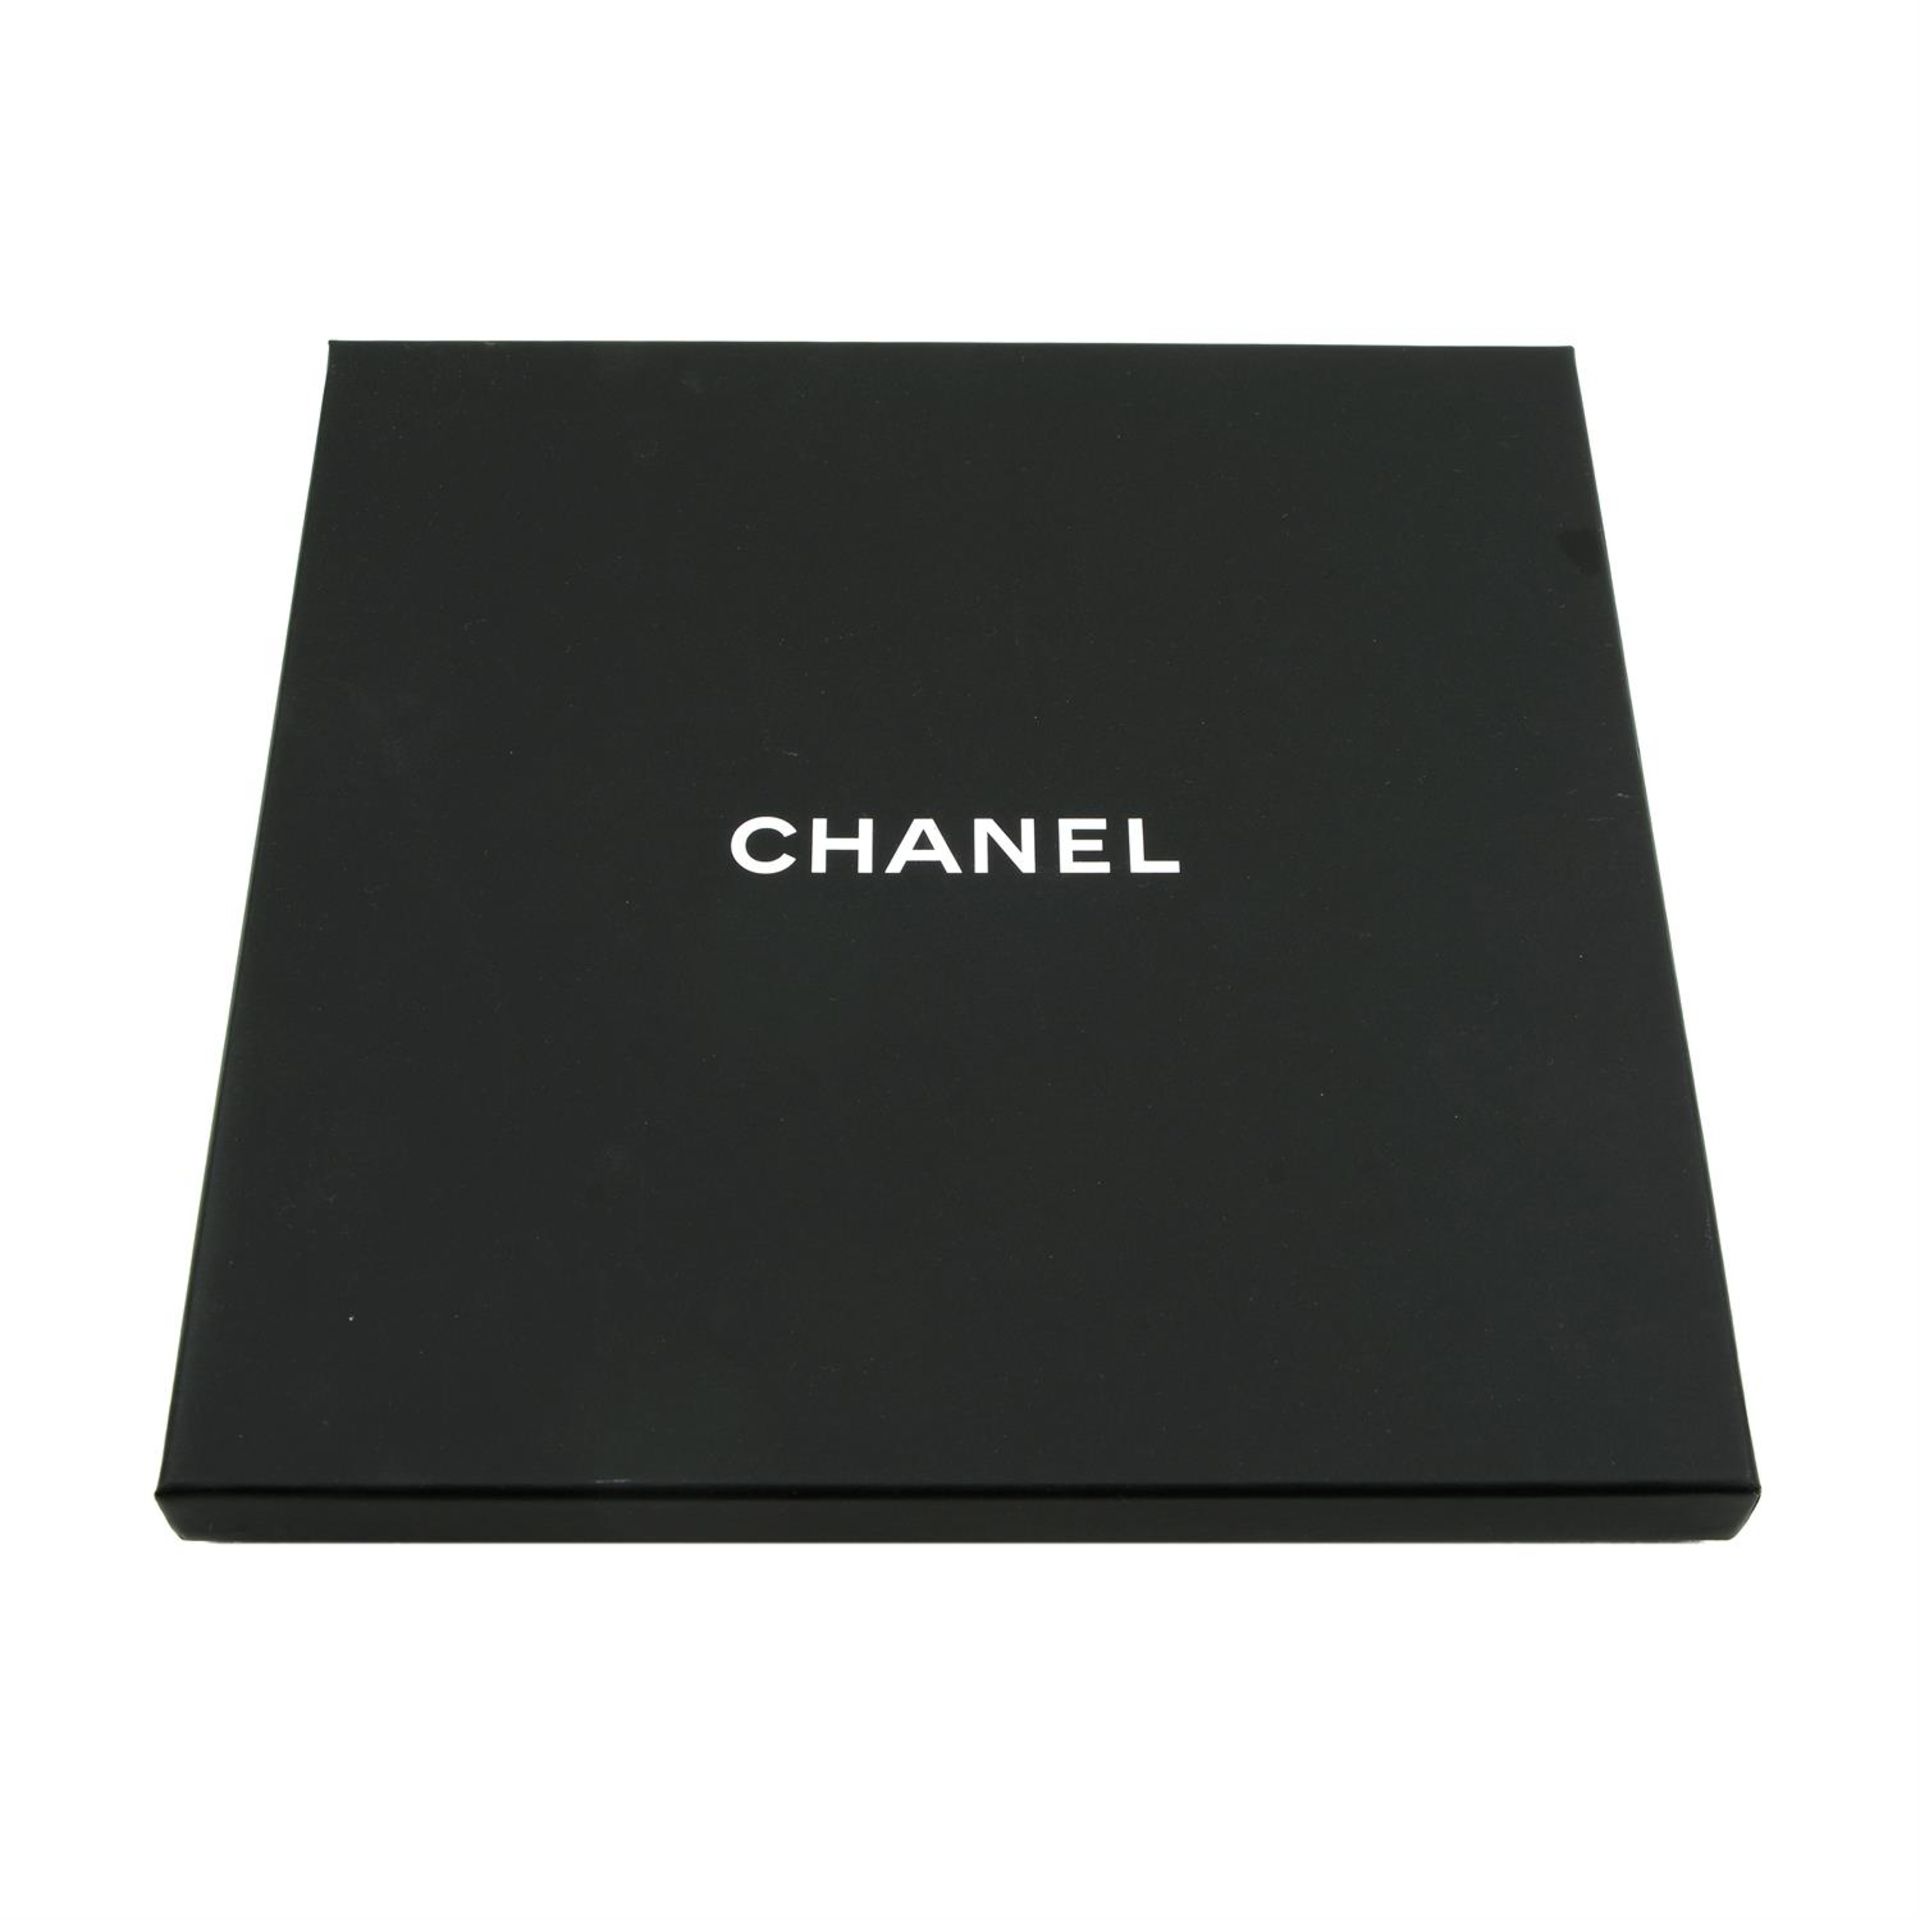 CHANEL - a Chanel Airlines silk scarf. - Image 2 of 2